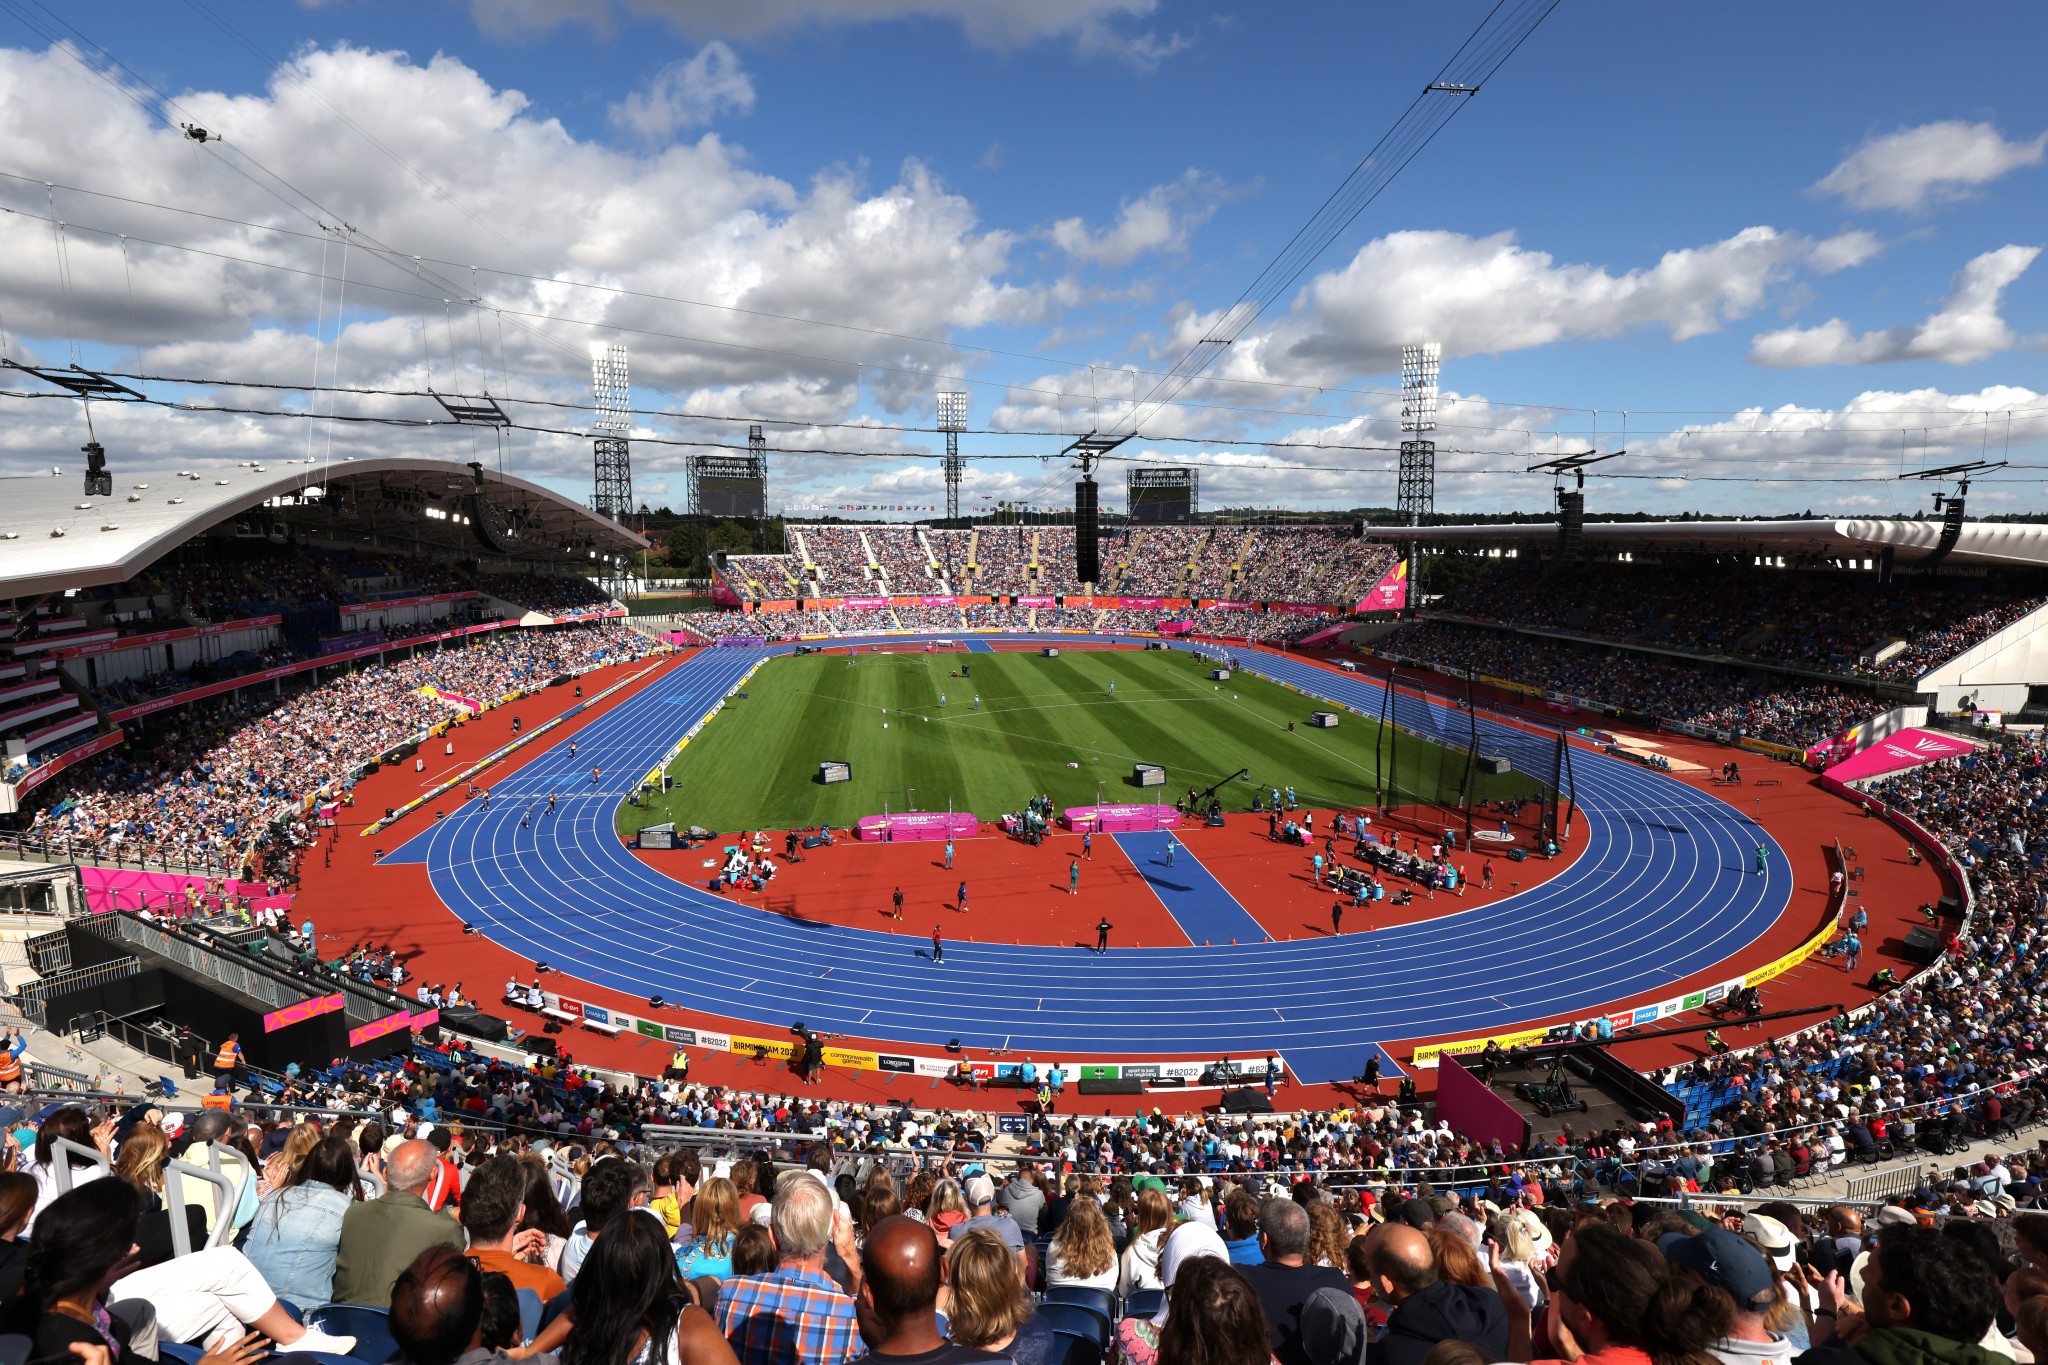 The Alexander Stadium is set to hold the 2026 European Athletics Championships following the success of the Birmingham 2022 Commonwealth Games ©Getty Images